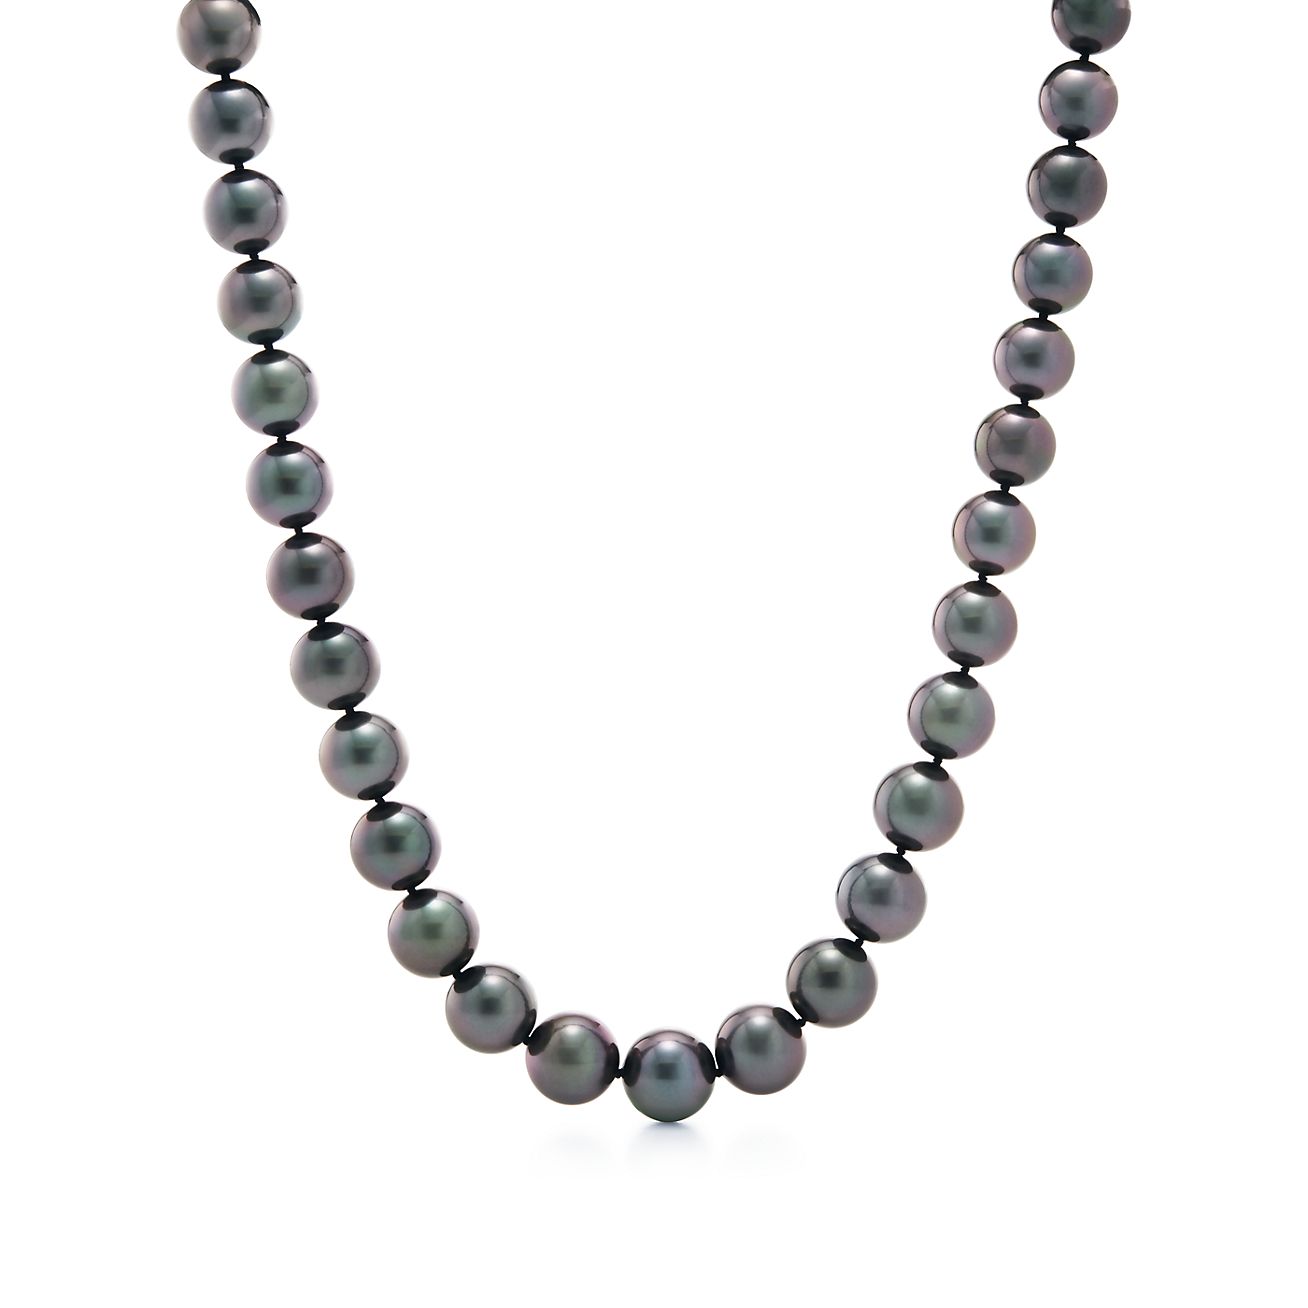 Necklace of Tahitian pearls with 18k 